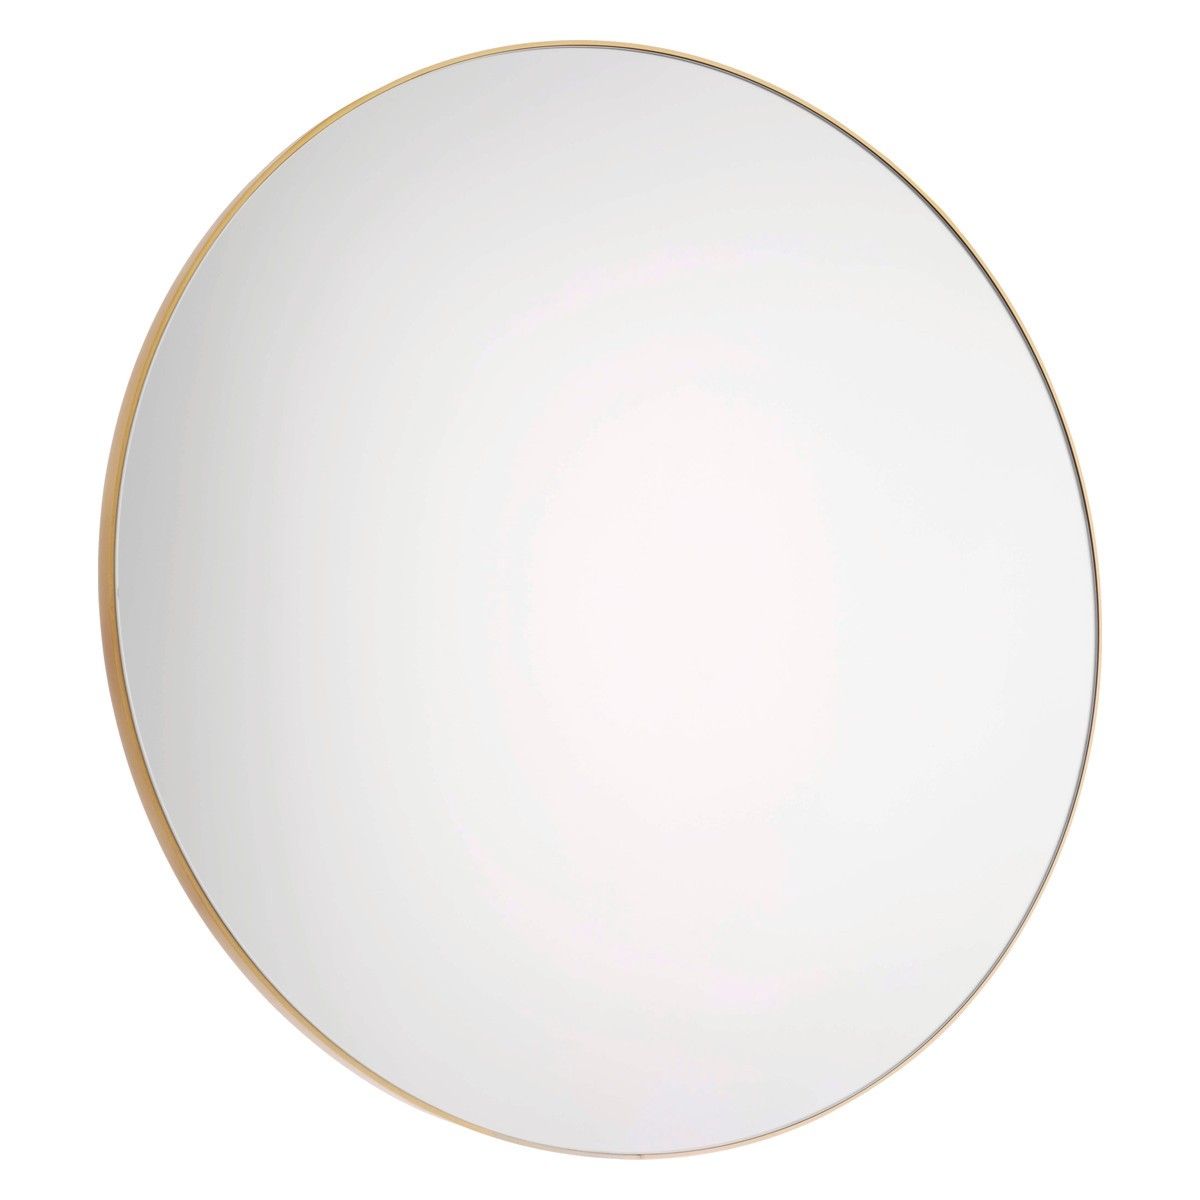 Patsy Large Round Gold Wall Mirror D82cm Buy Now At Habitat Uk Intended For Large Round Mirrors For Sale (View 4 of 15)